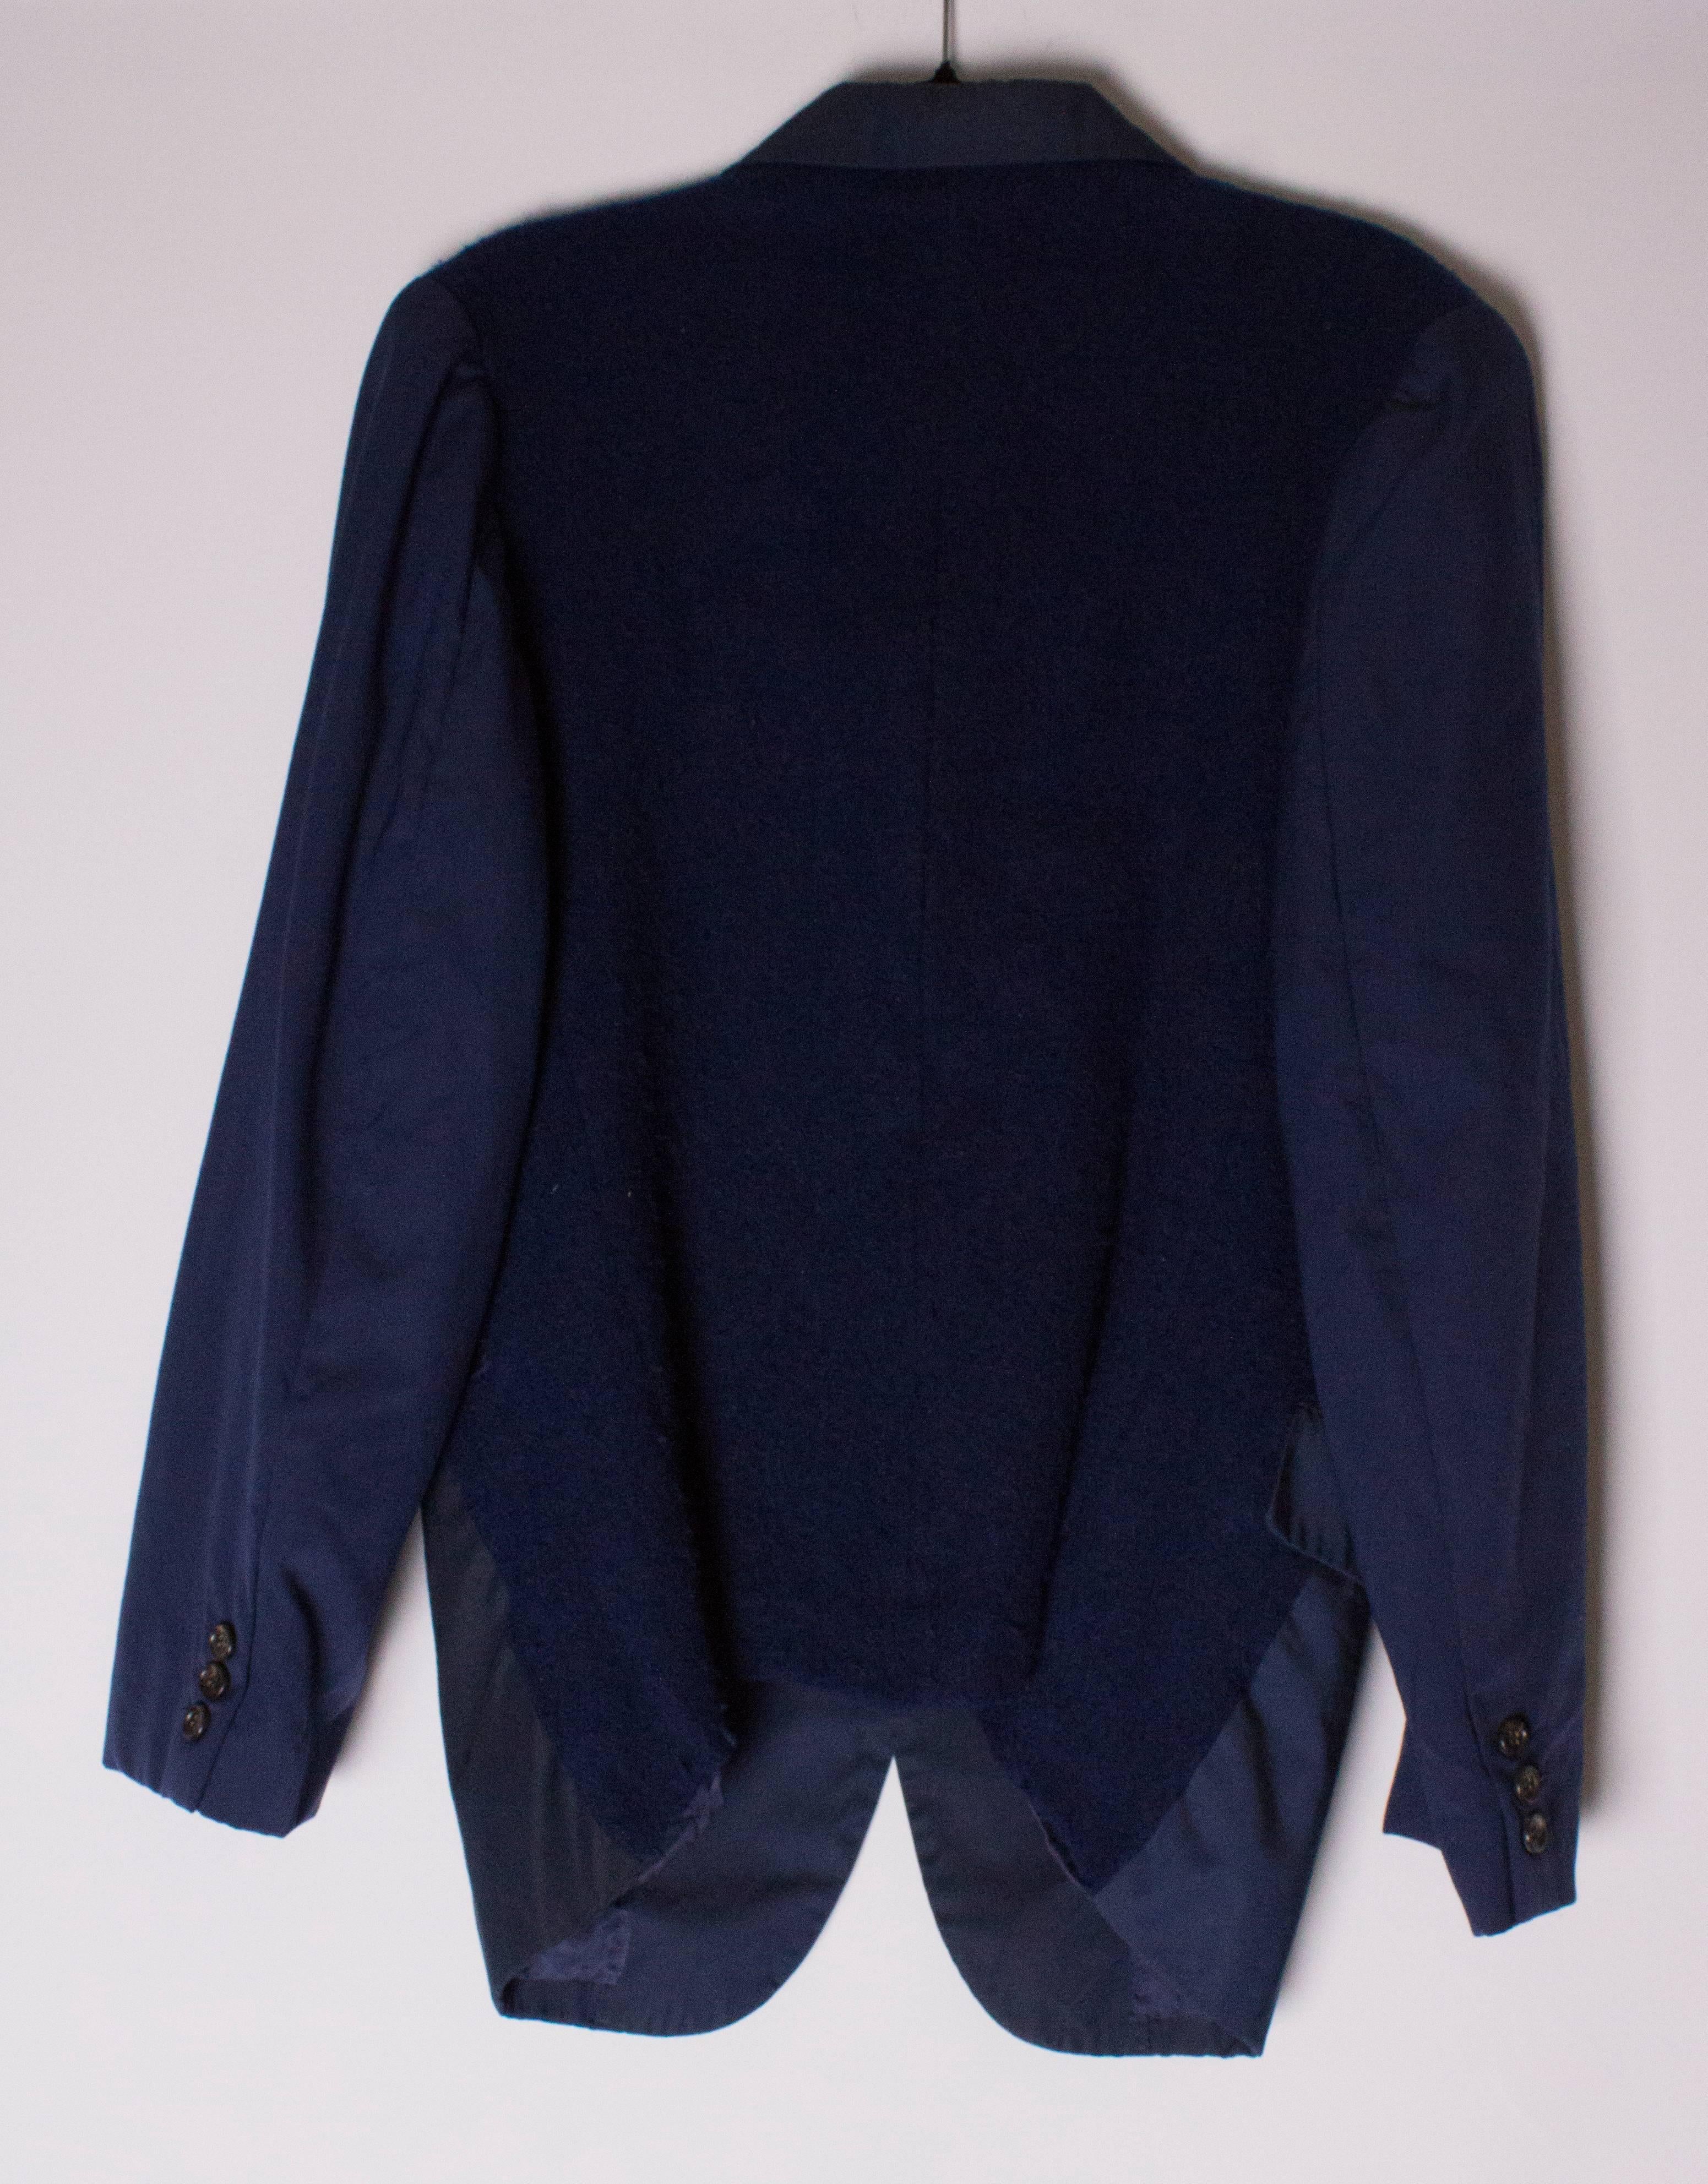 A great vintage navy blue jacket by Comme des Garcons,  Homme Plus range.
The main part of the jacket is wool , and the back is a boucle like fabric. The back is unlined and the front of the jacket lined.  It has one chest pocket and two waist